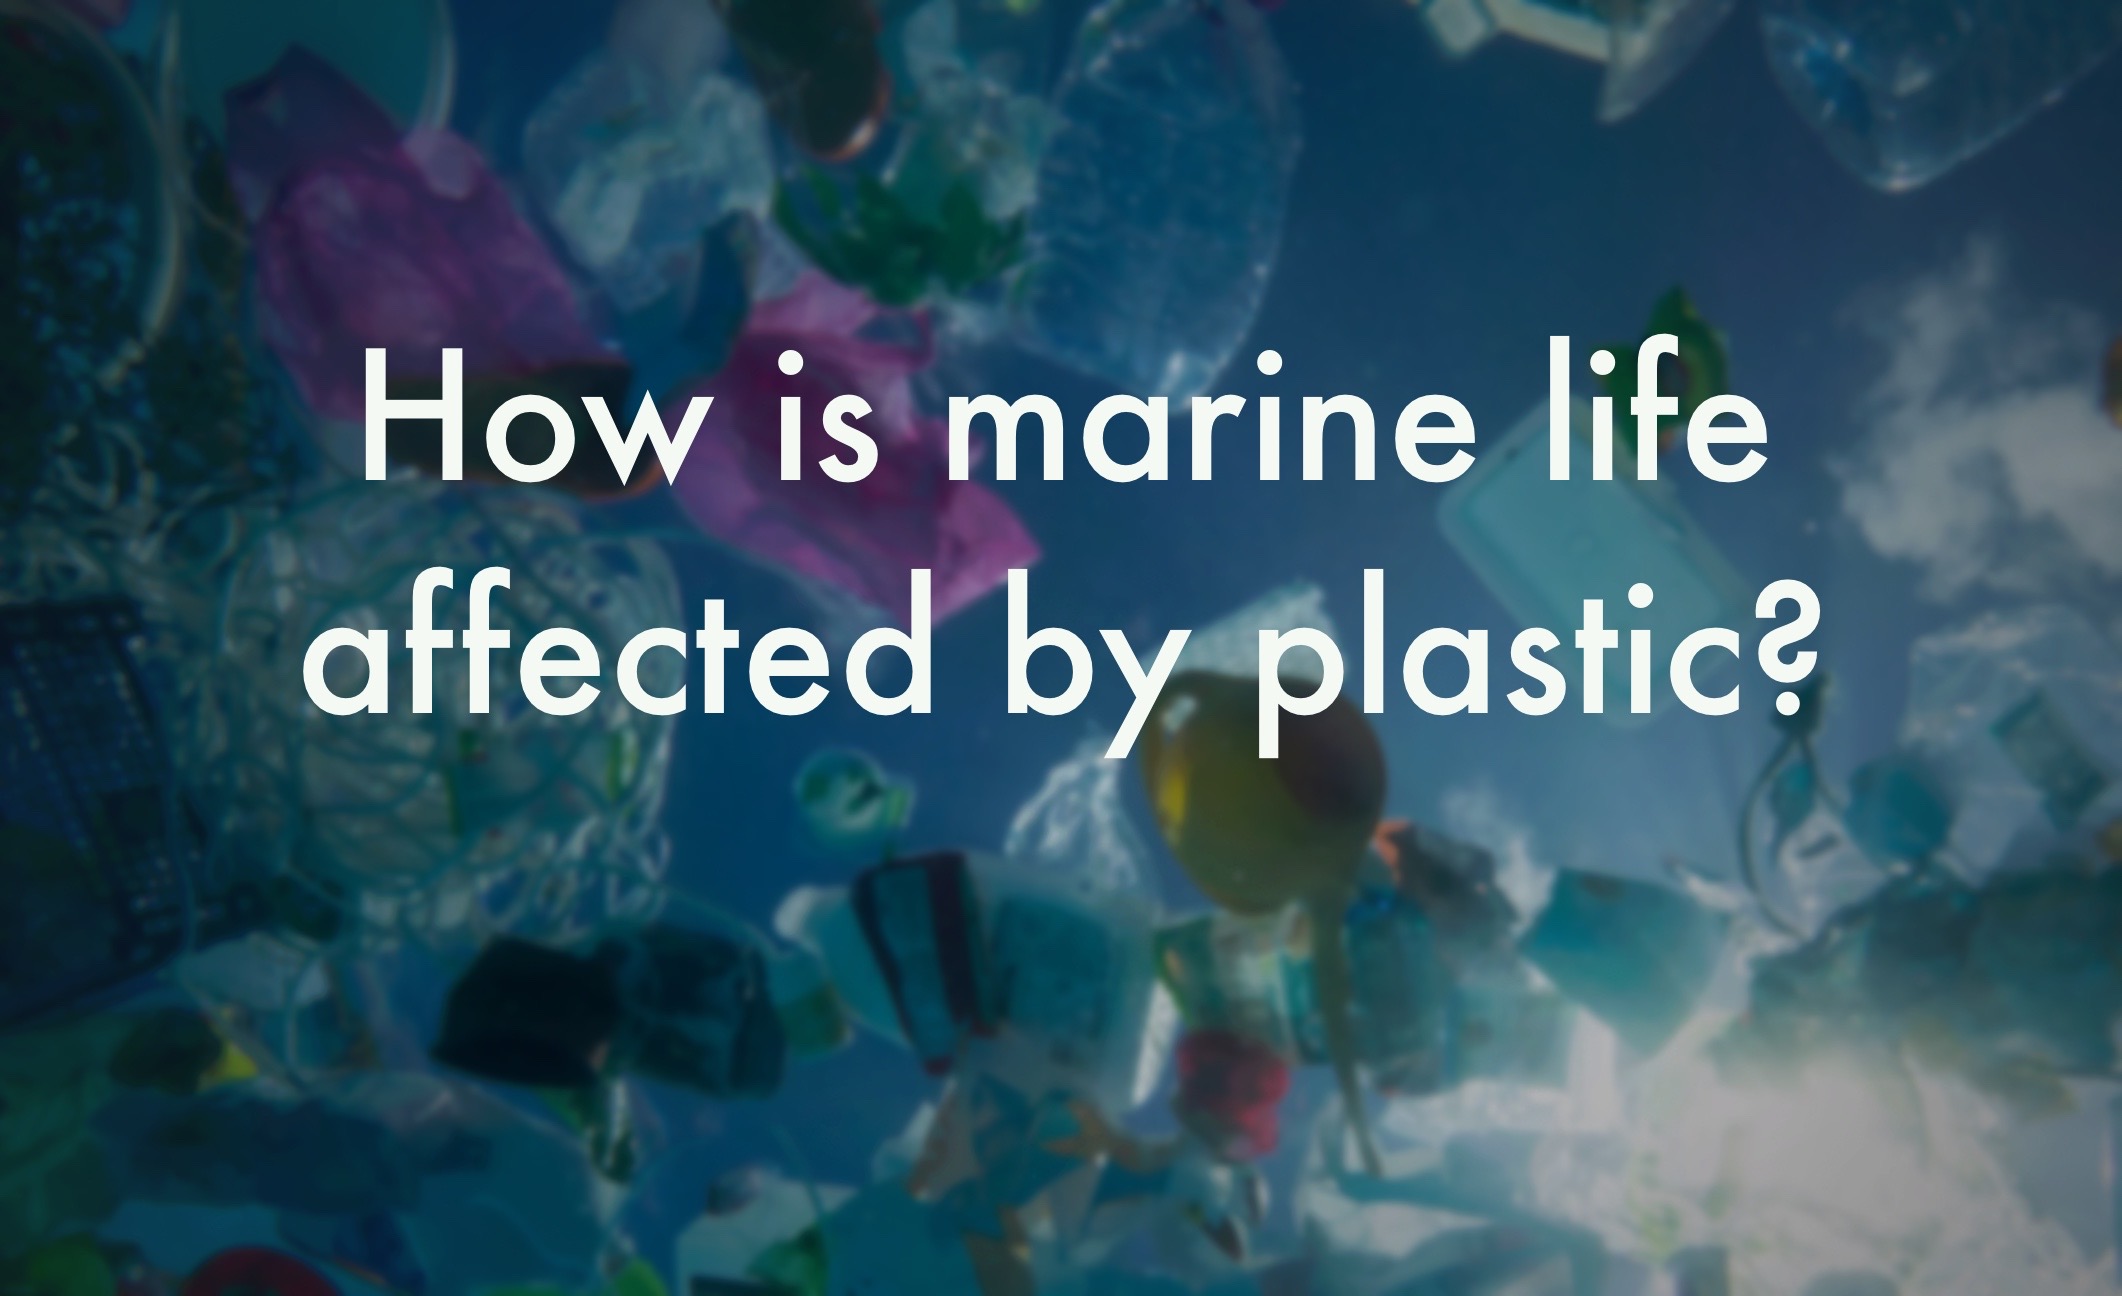 How is marine life affected by plastic?